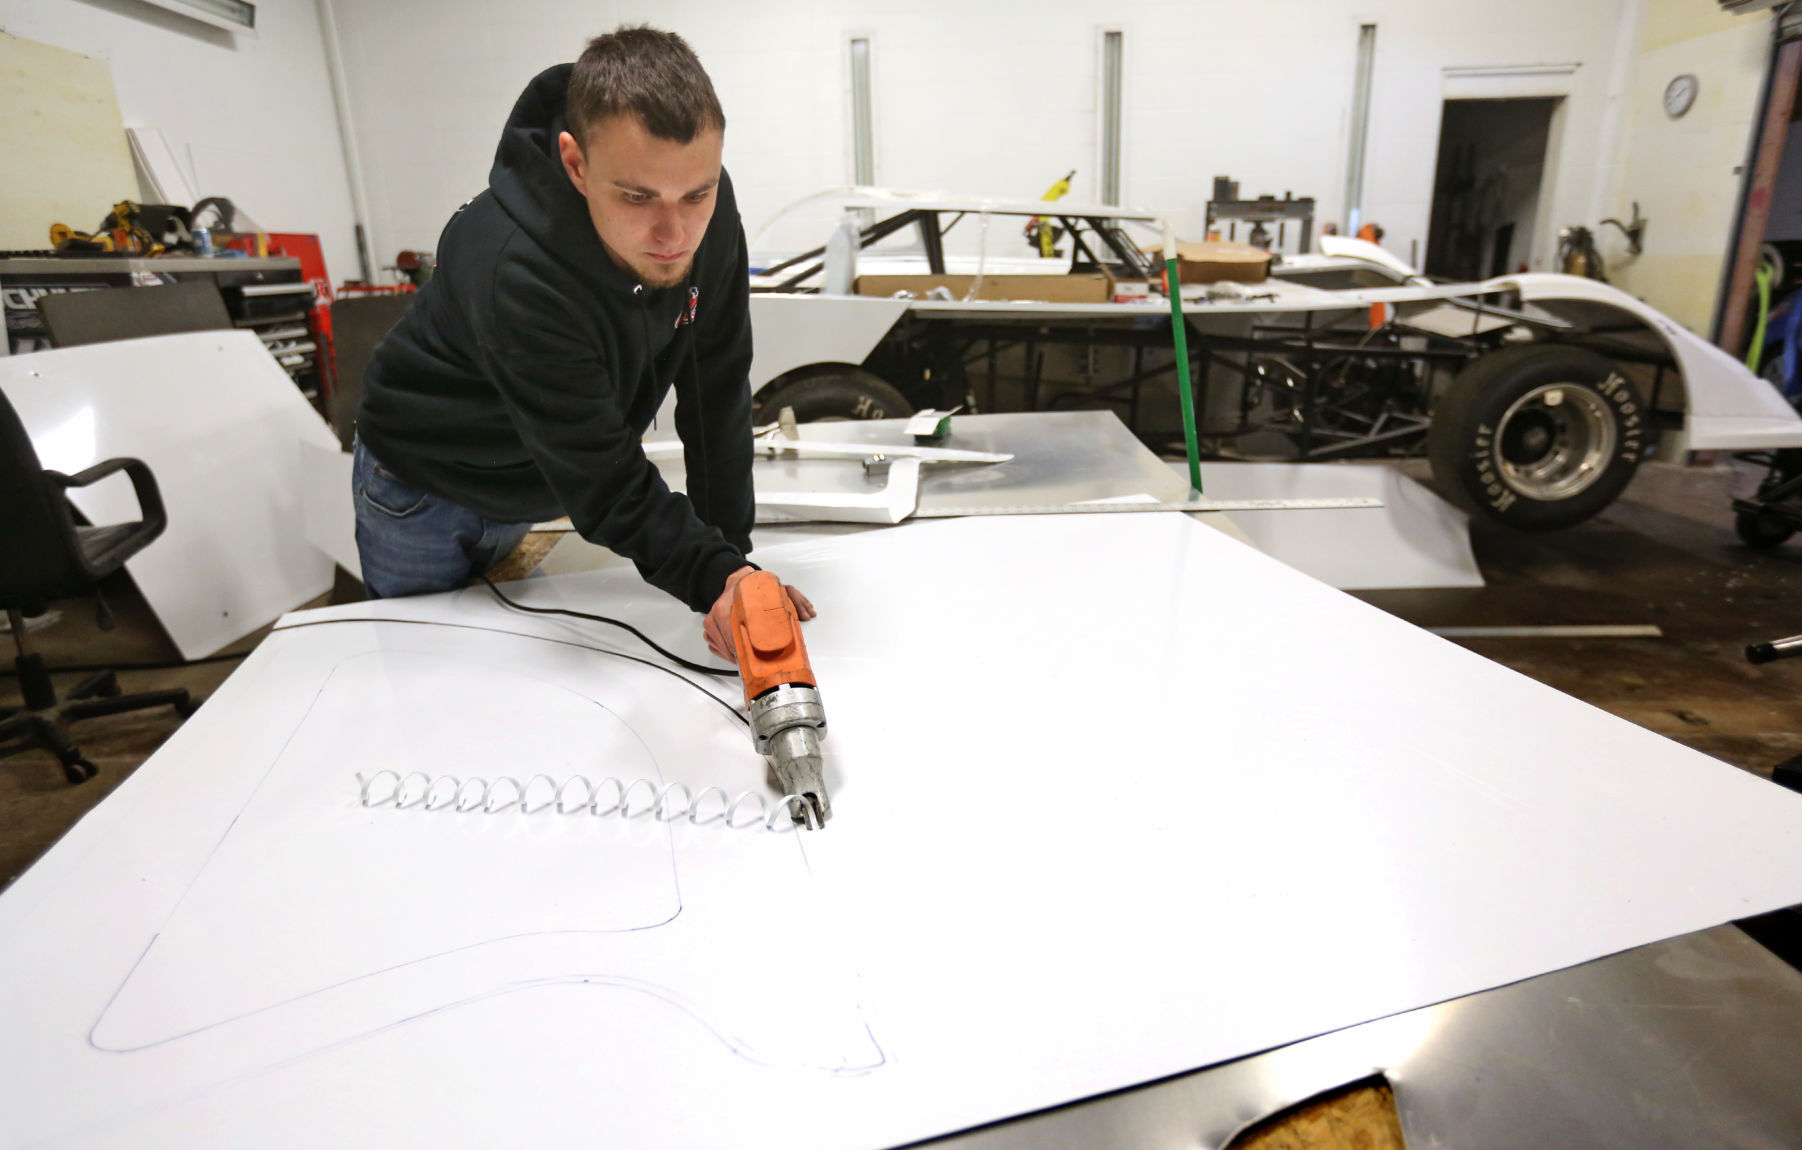 Tyler Madigan cuts a piece of sheet metal while working on a roof of a late model racing car at TMR Enterprises in Dubuque on Friday, Jan. 15, 2021. PHOTO CREDIT: JESSICA REILLY